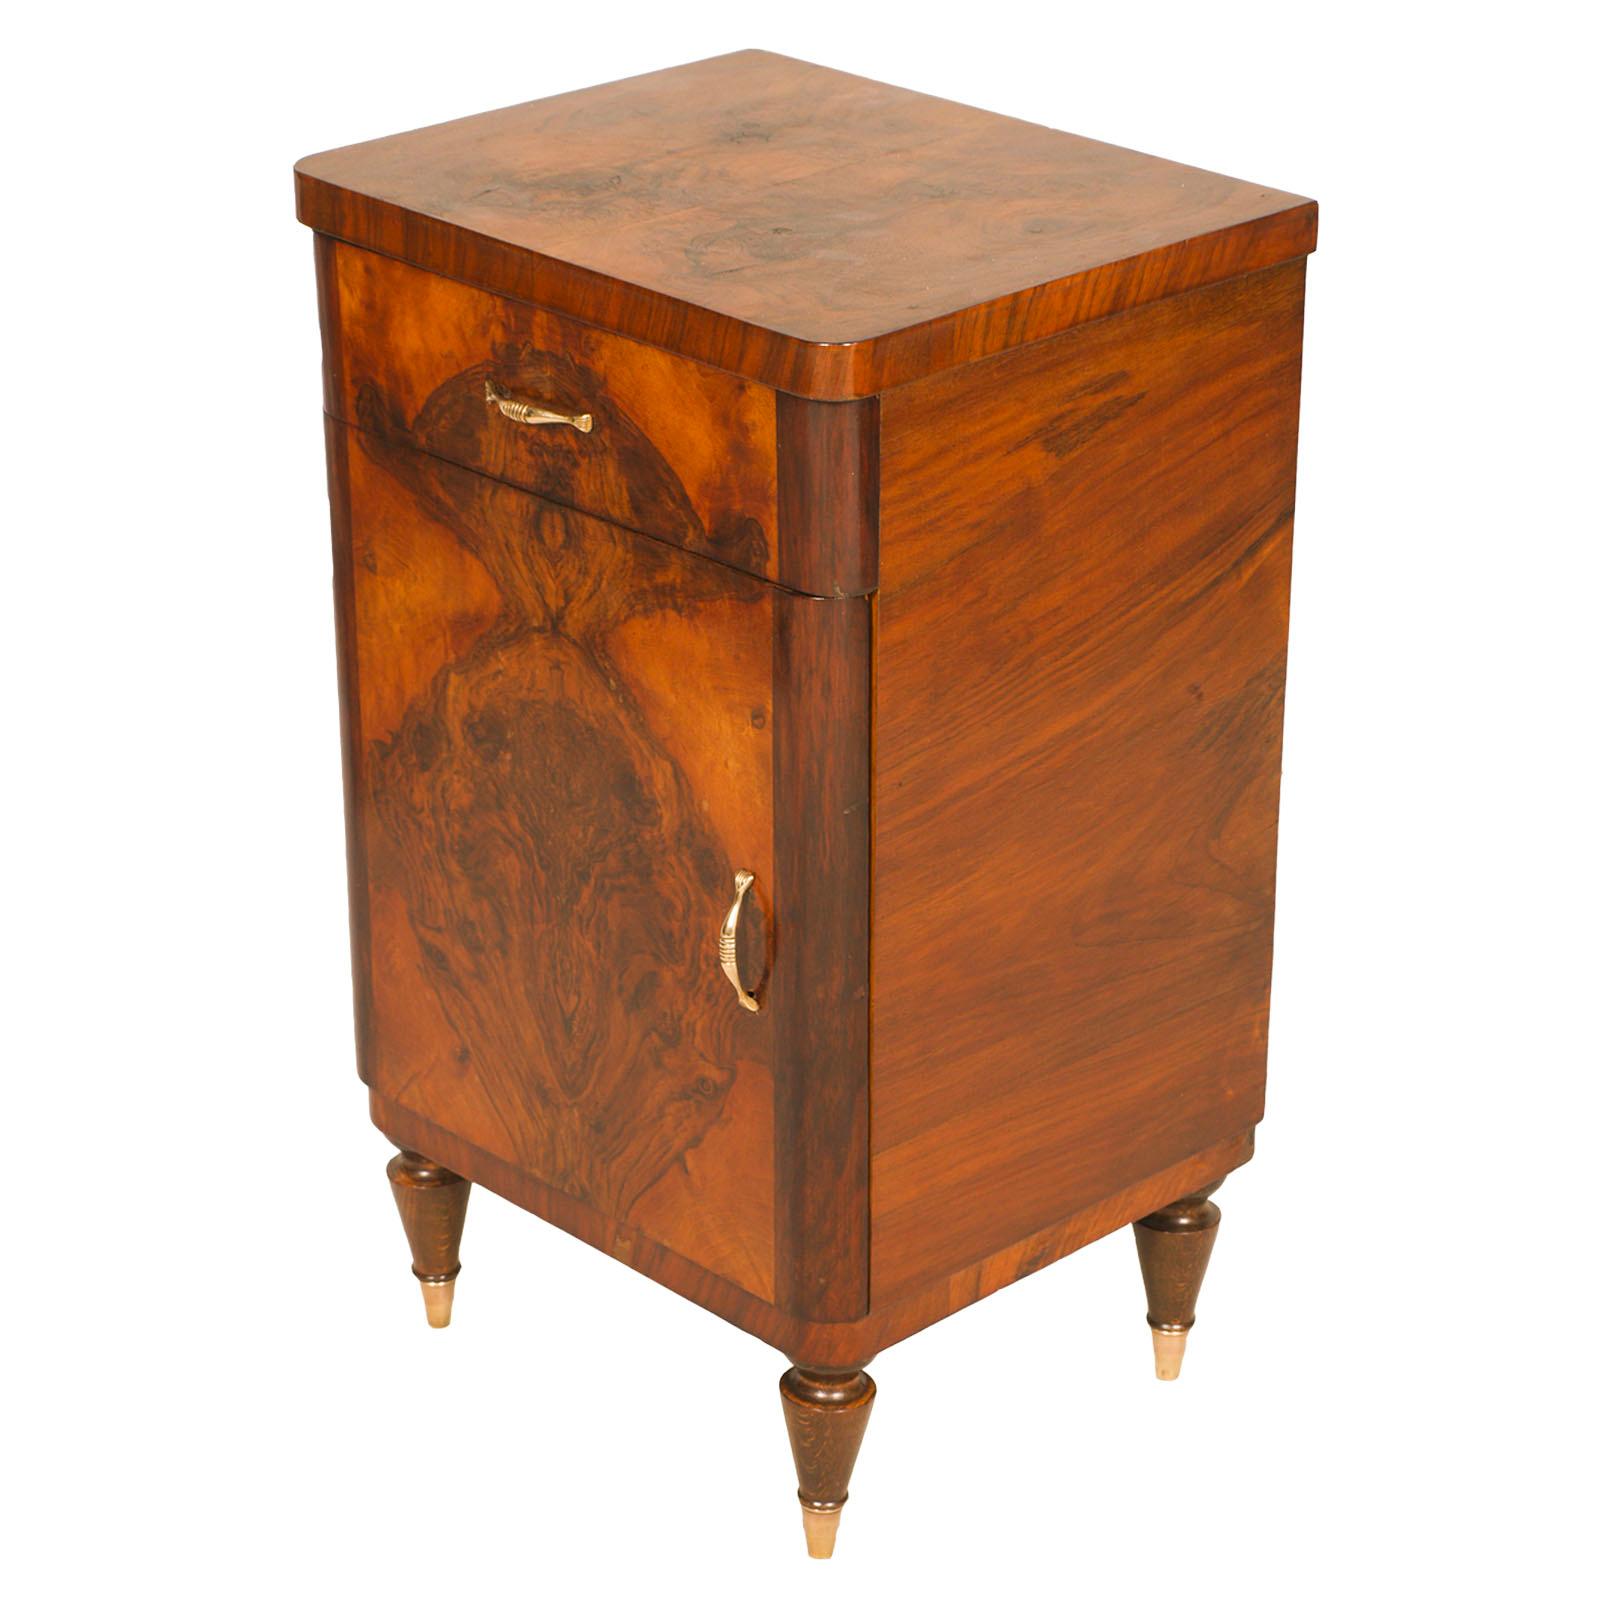 Italian by Gaetano Borsani, 1920s Art Deco nightstand veneered burl walnut with golden brass handle and foot. We have the pair of bedside tables, one right and one left with its dresser. Polished with wax finish.
Measures nightstand in cm: H 76 x L